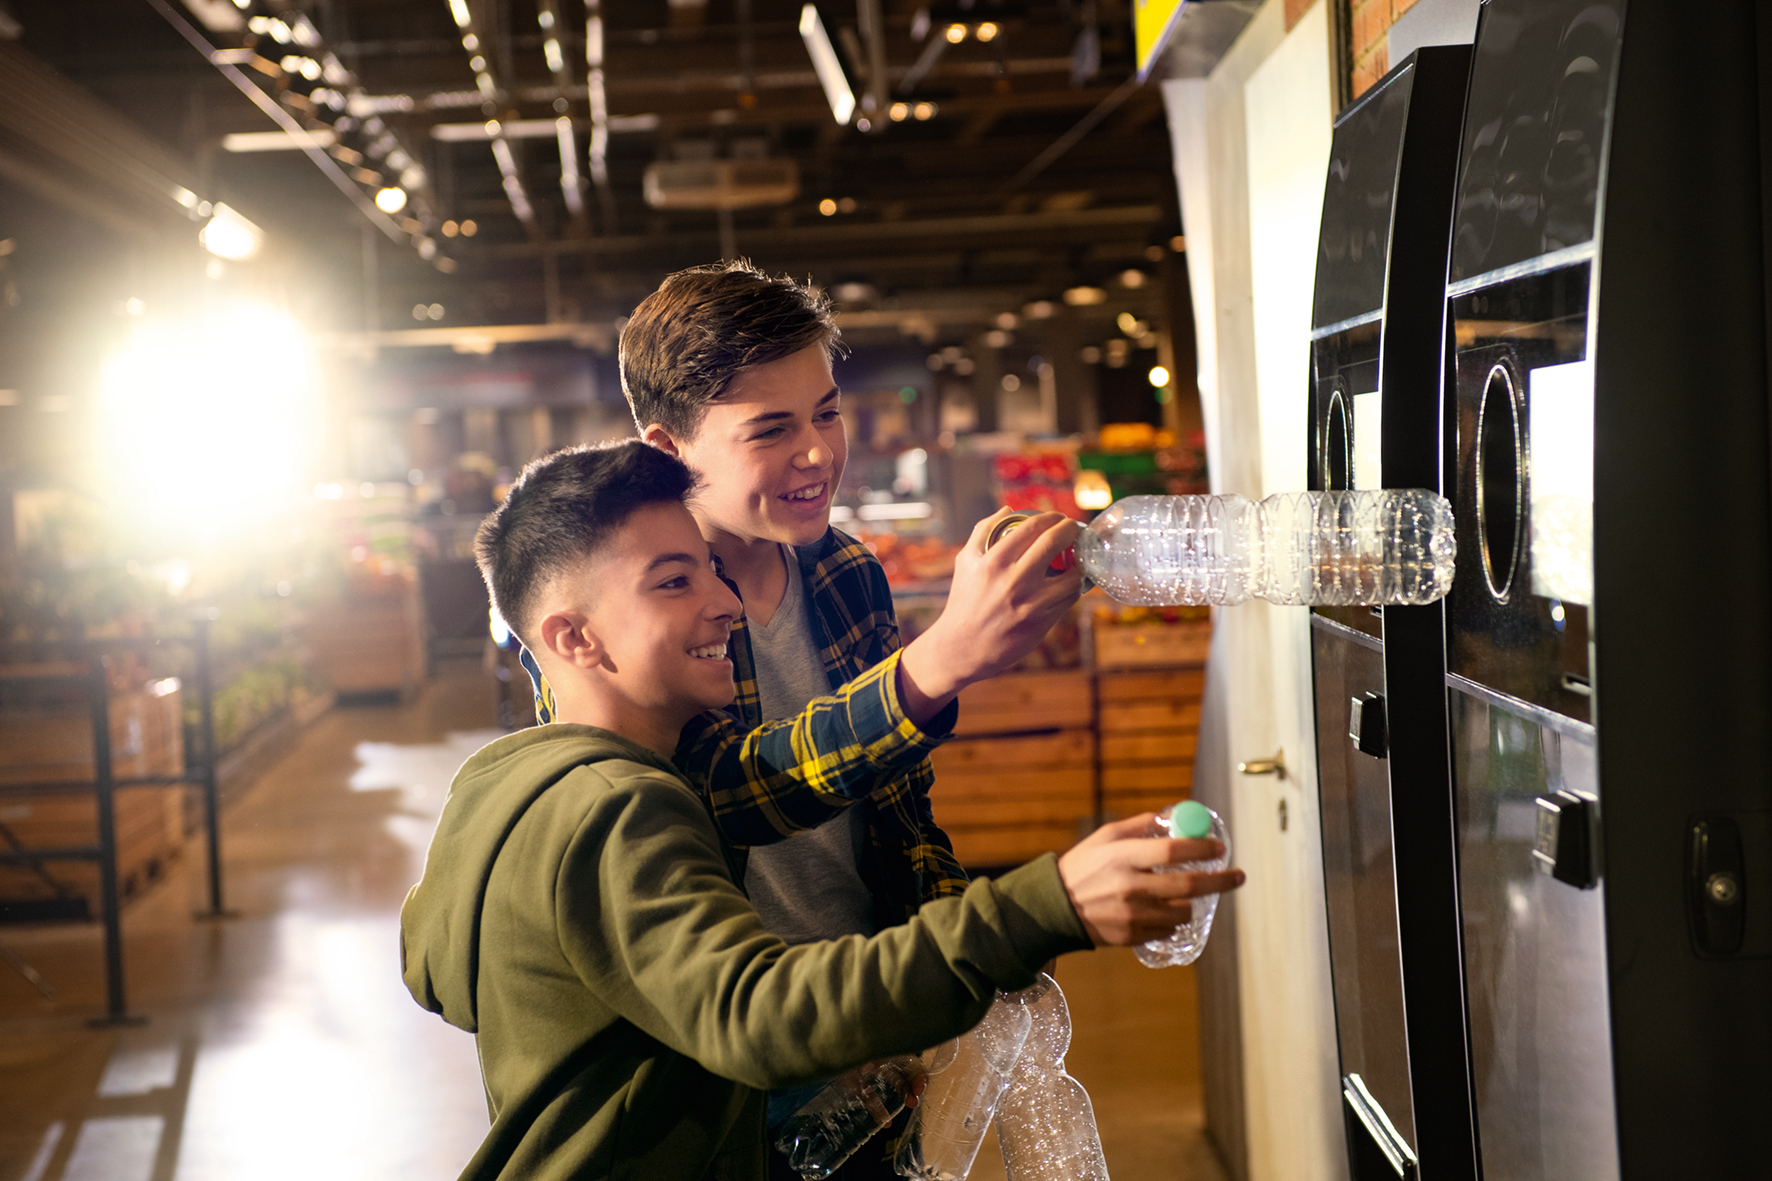 image of kids with reverse vending machines